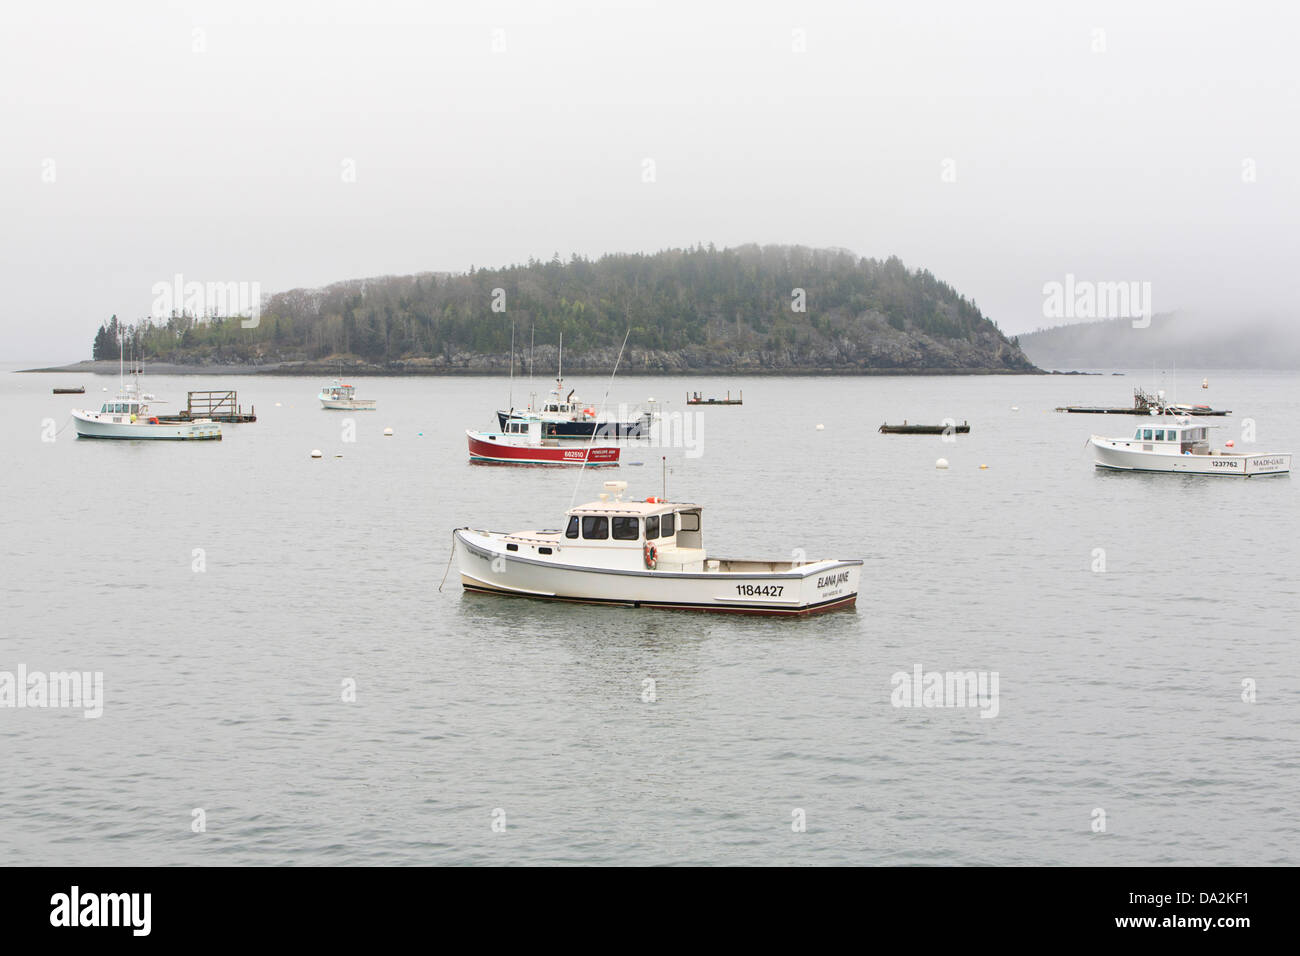 Fishing boats at anchor in foggy weather, Bar Harbor, Maine. Stock Photo